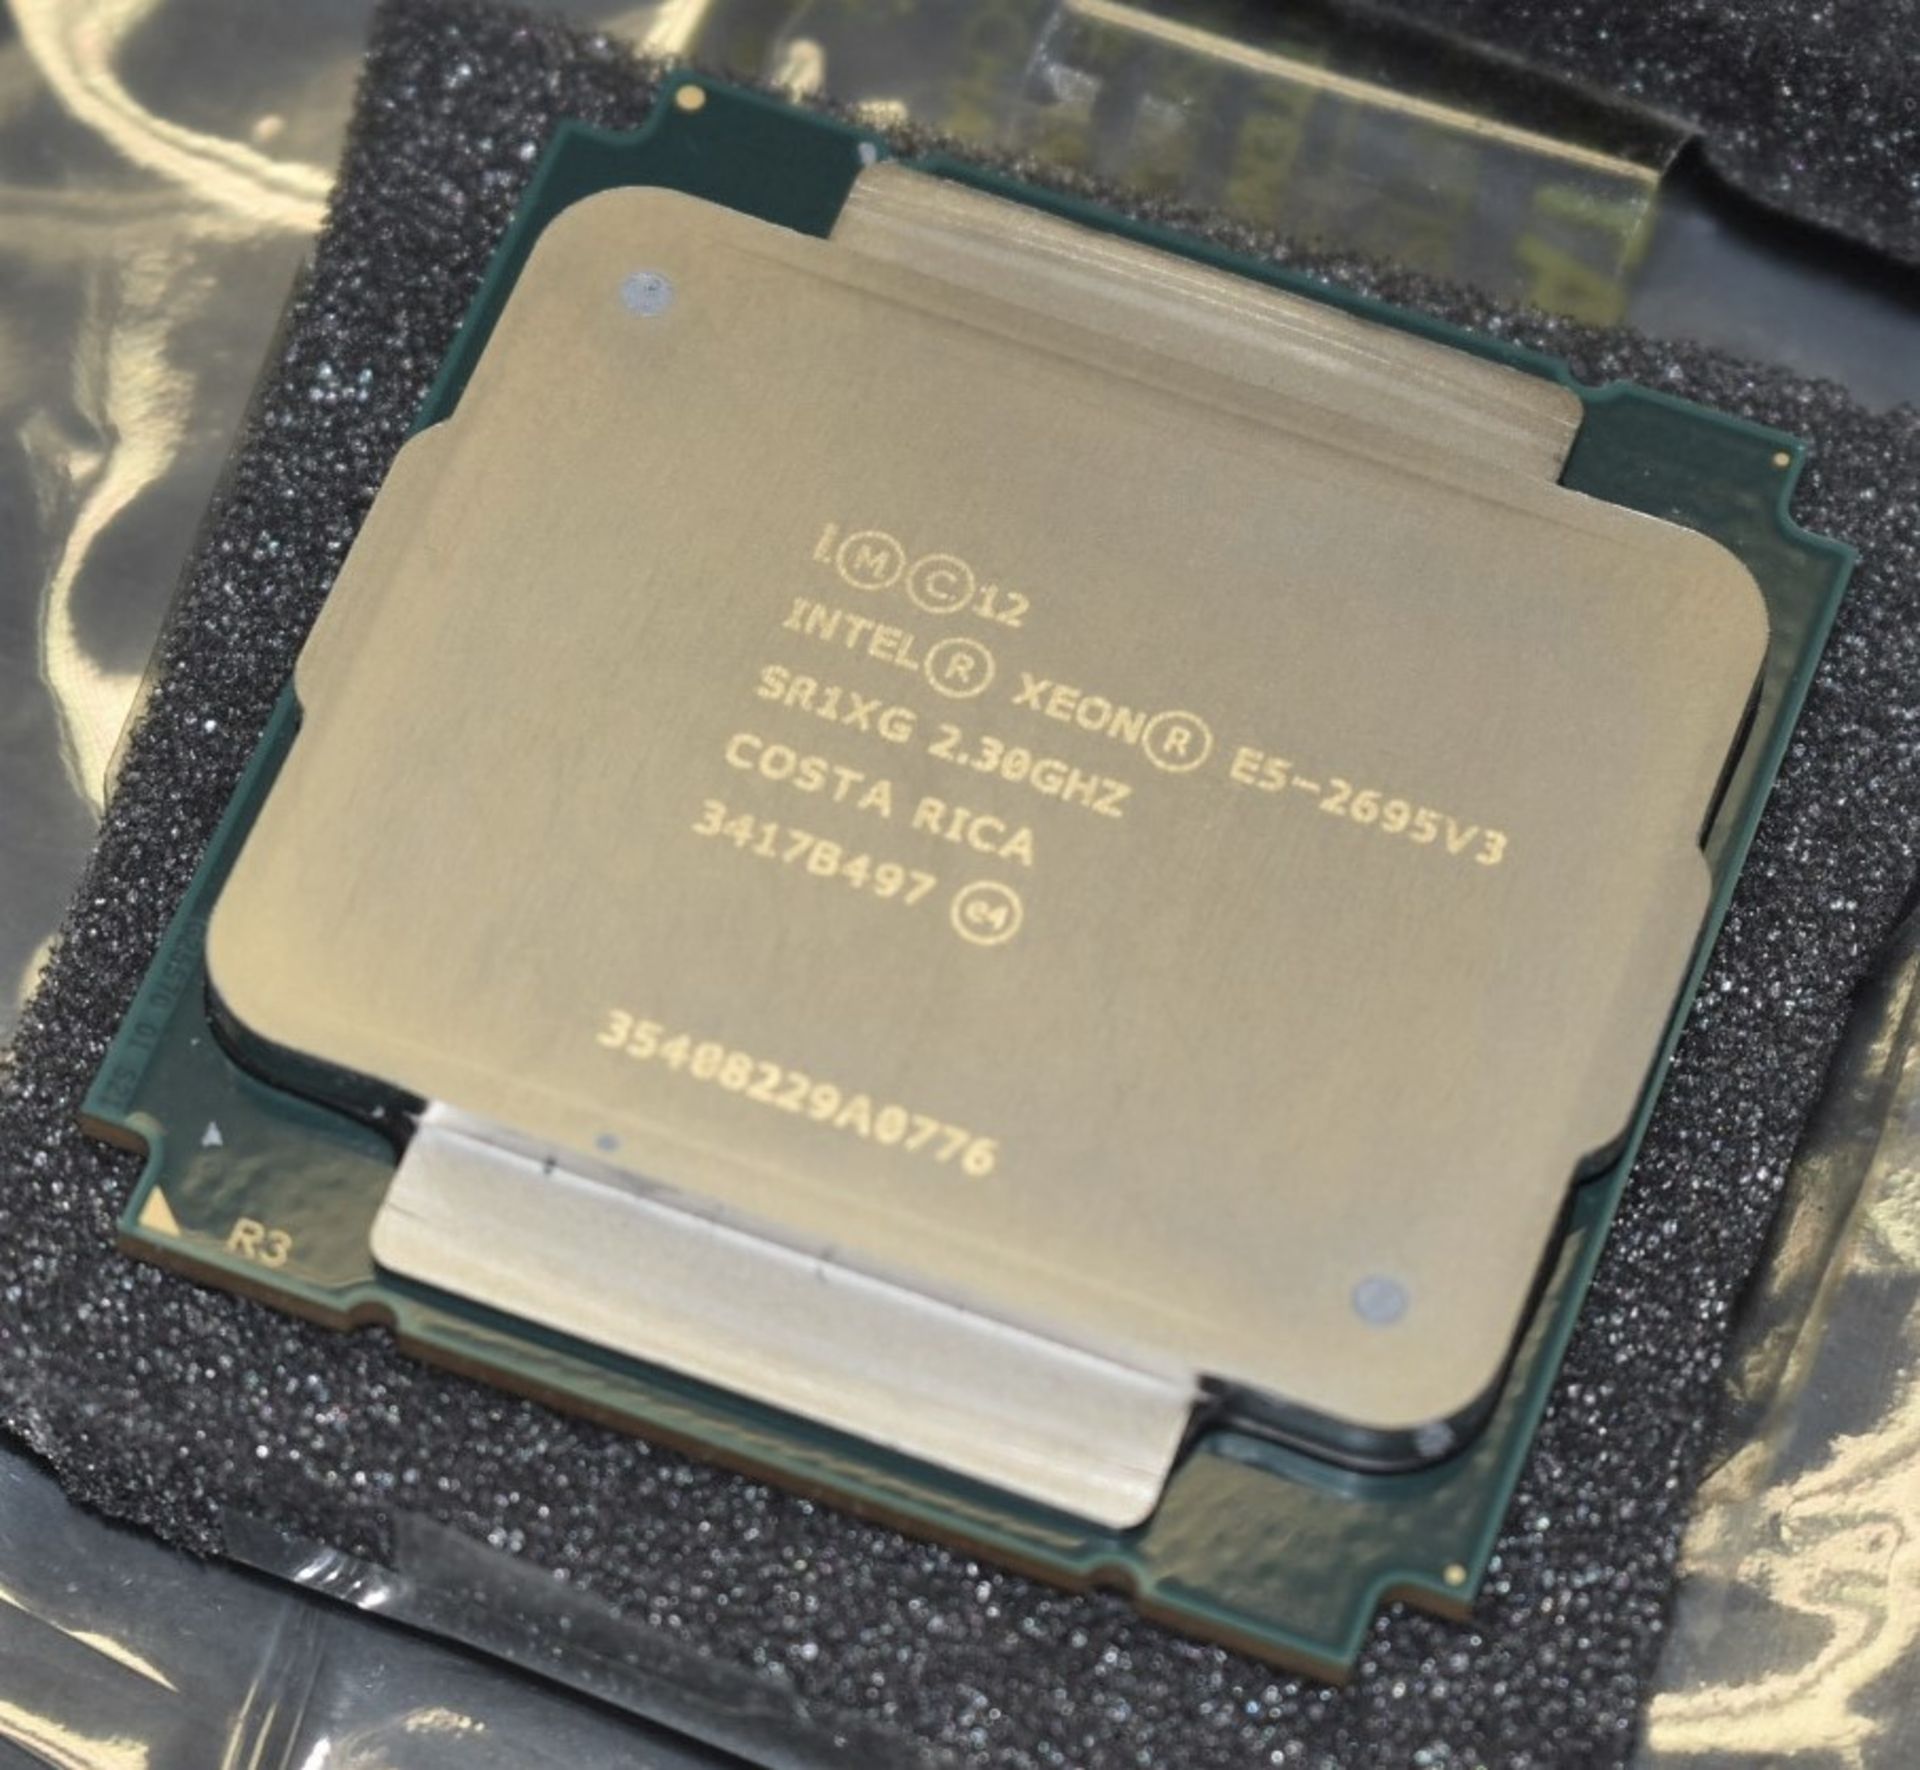 1 x Intel Xeon E5-2695V3 3.3ghz Processor - Features 14 Cores and 28 Threads, 35mb Cache, Socket - Image 2 of 4